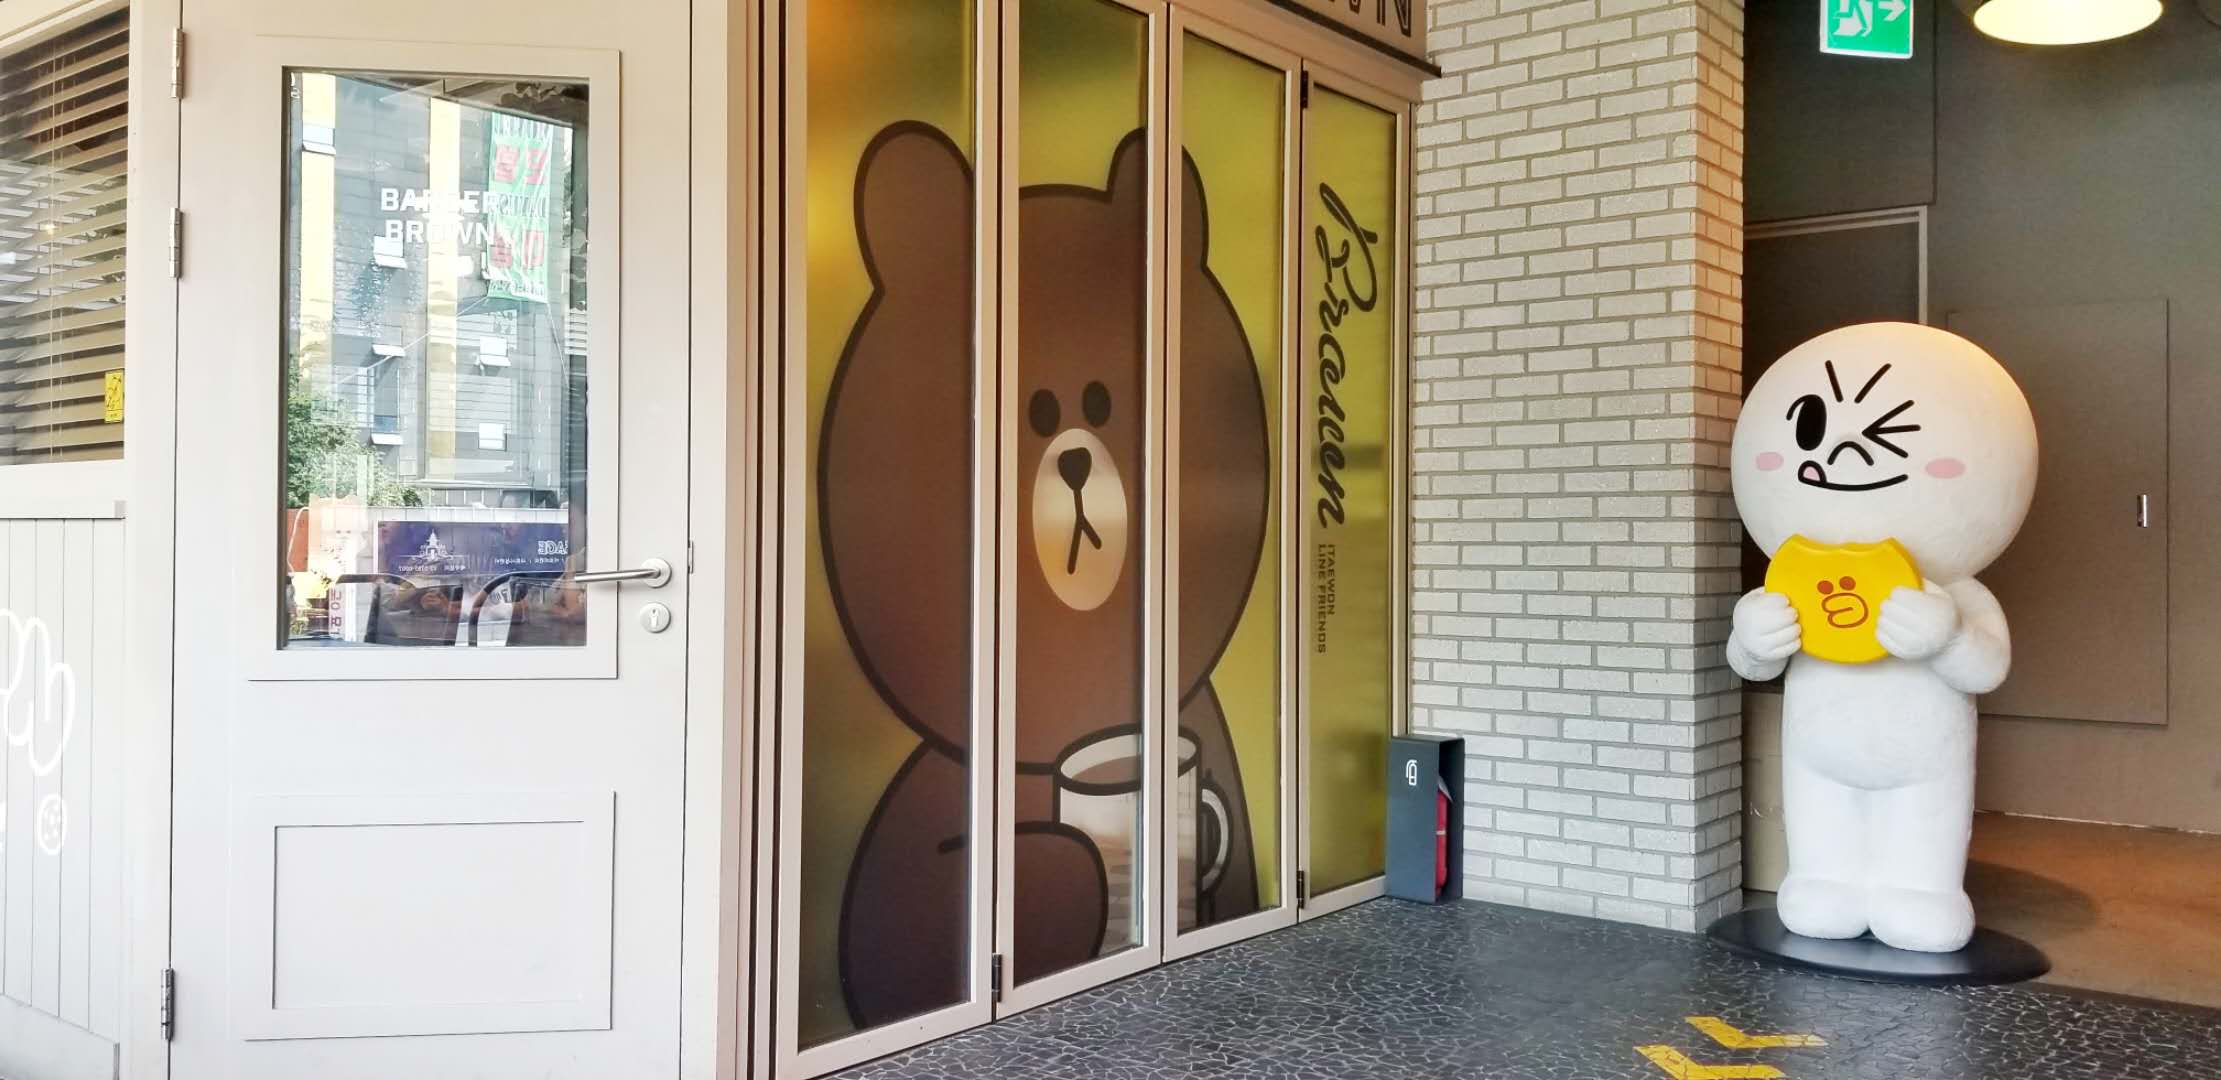 One of the corners of the Line Friends cafe